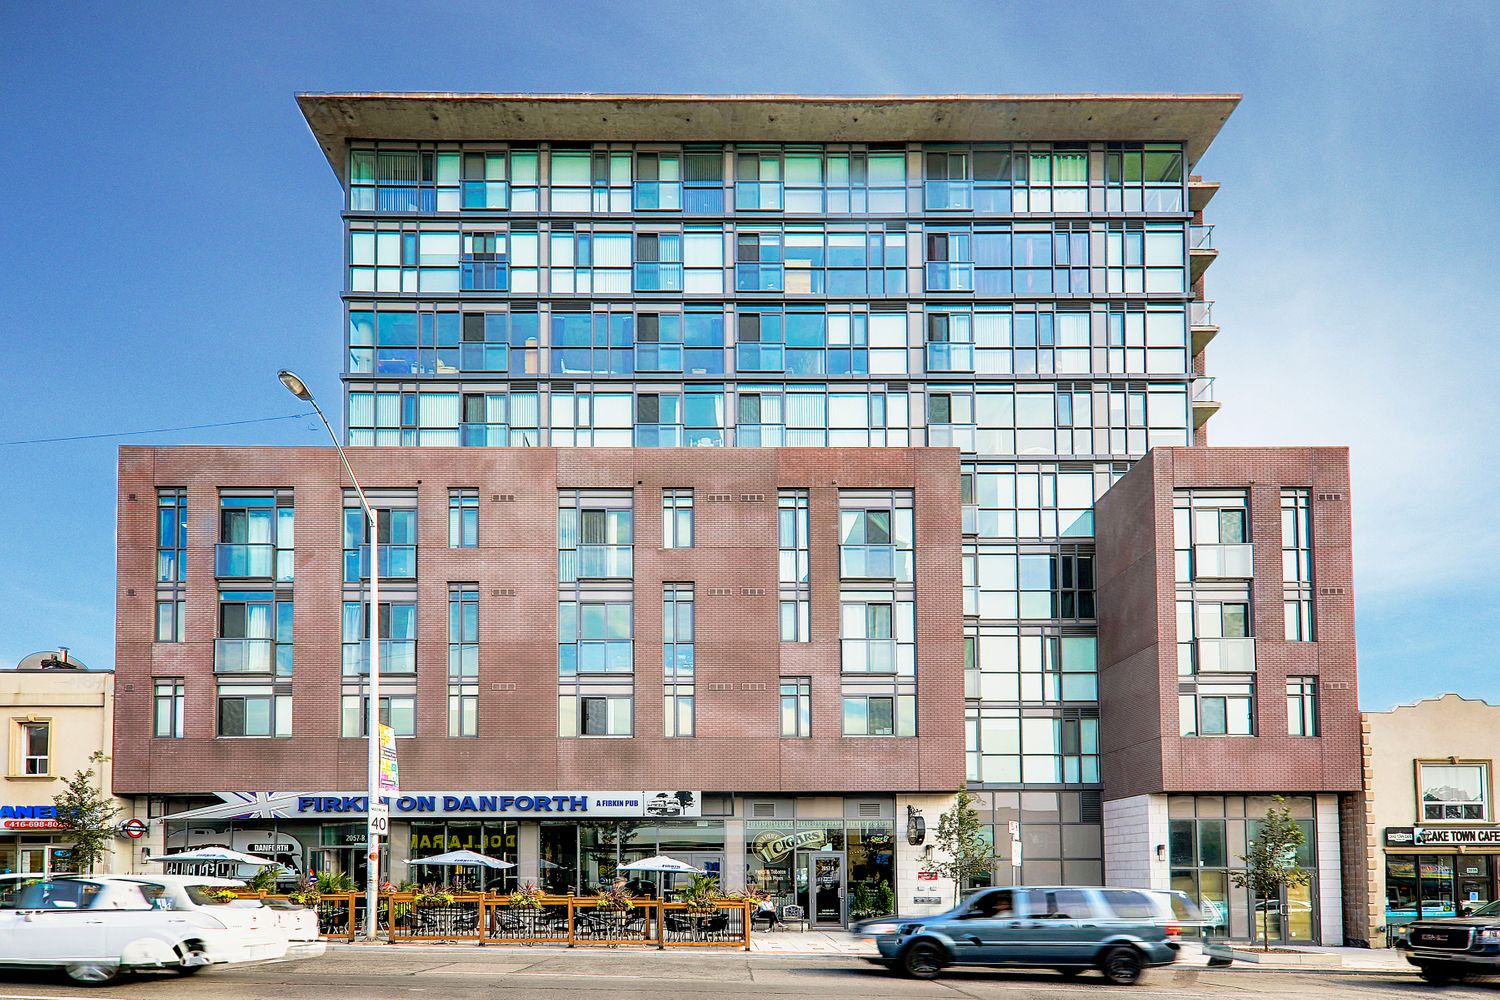 2055 Danforth Avenue. Carmelina Condos is located in  East End, Toronto - image #3 of 5